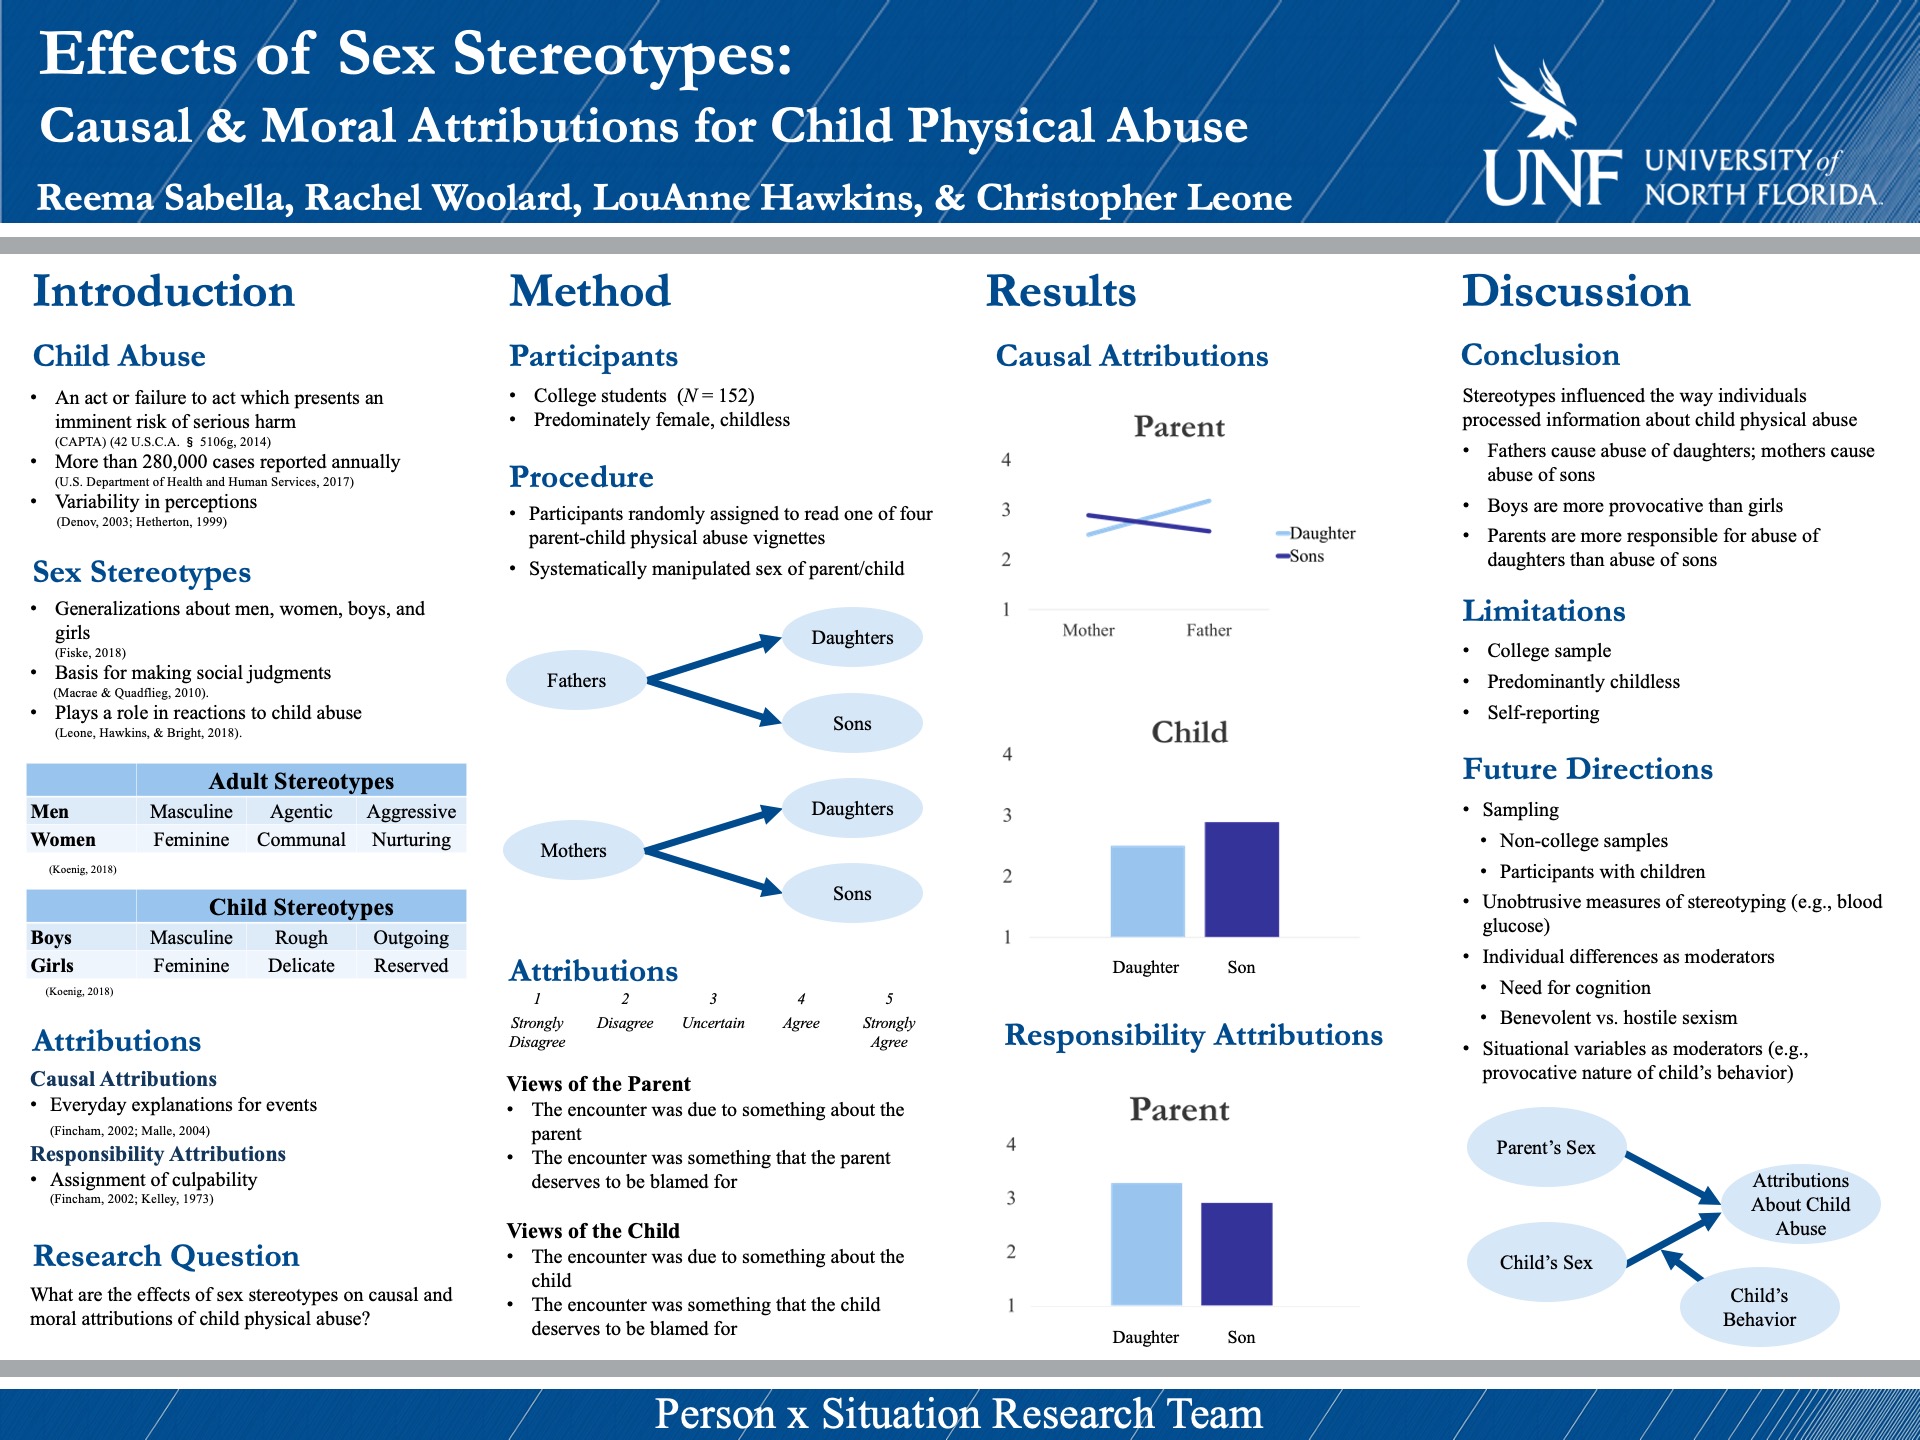 Effects of Sex Stereotypes: Causal & Moral Attributions for Child Physical Abuse poster